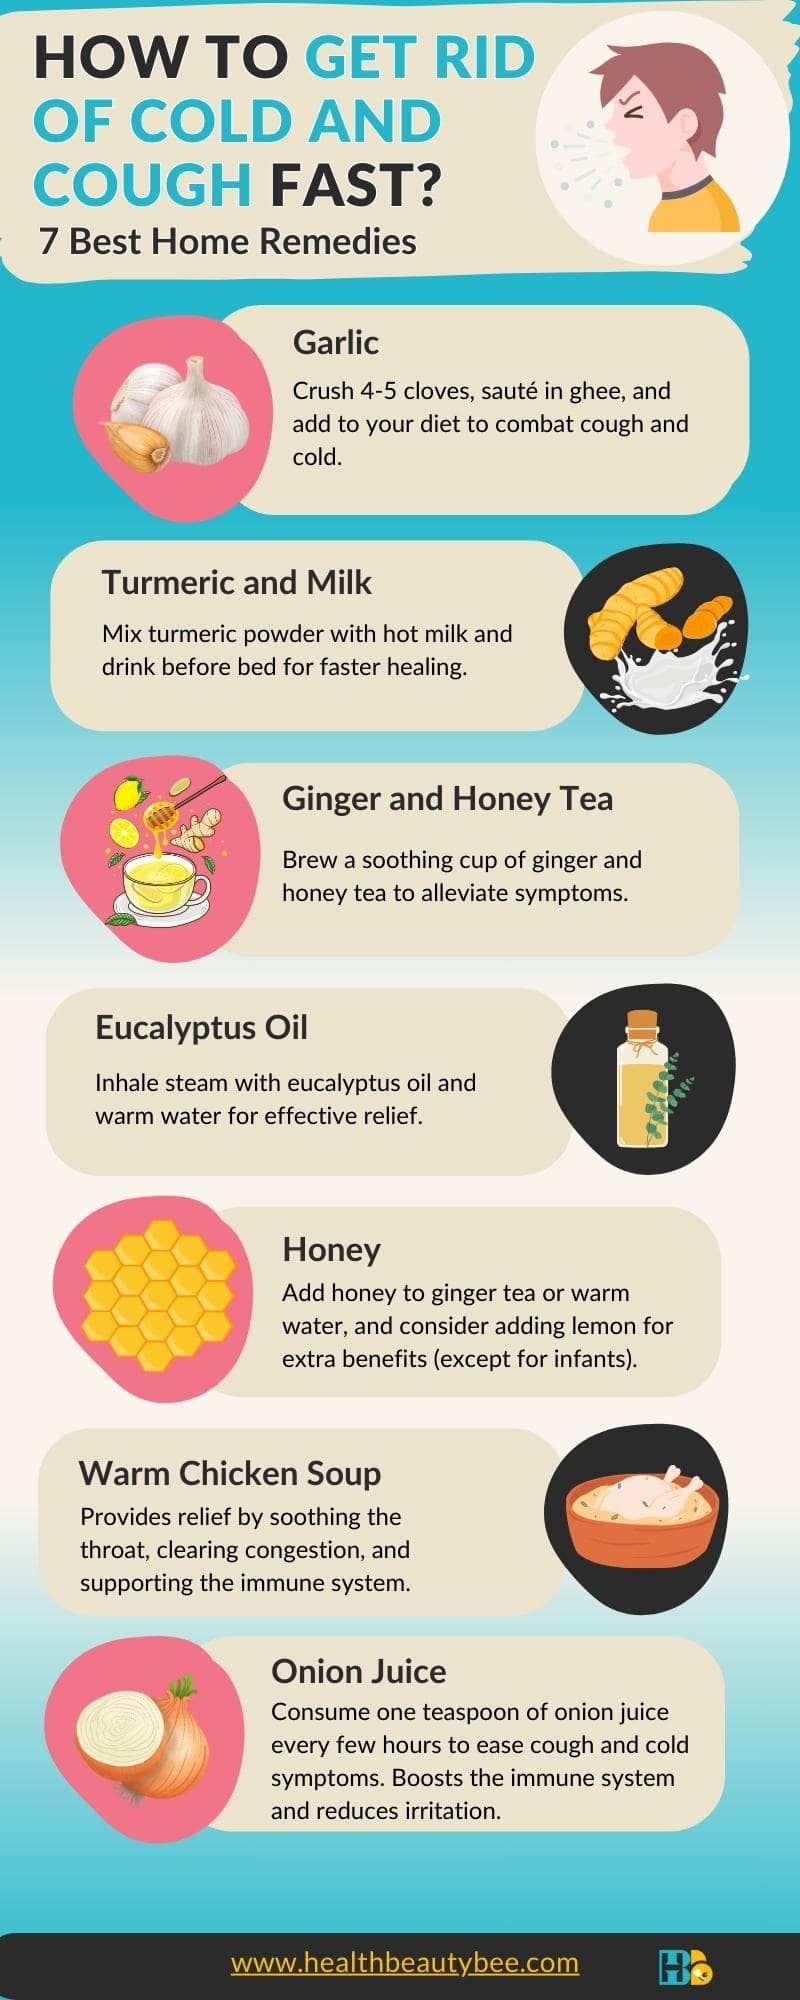 How to Get Rid of Cold and Cough Fast Healthbeautybee infographic